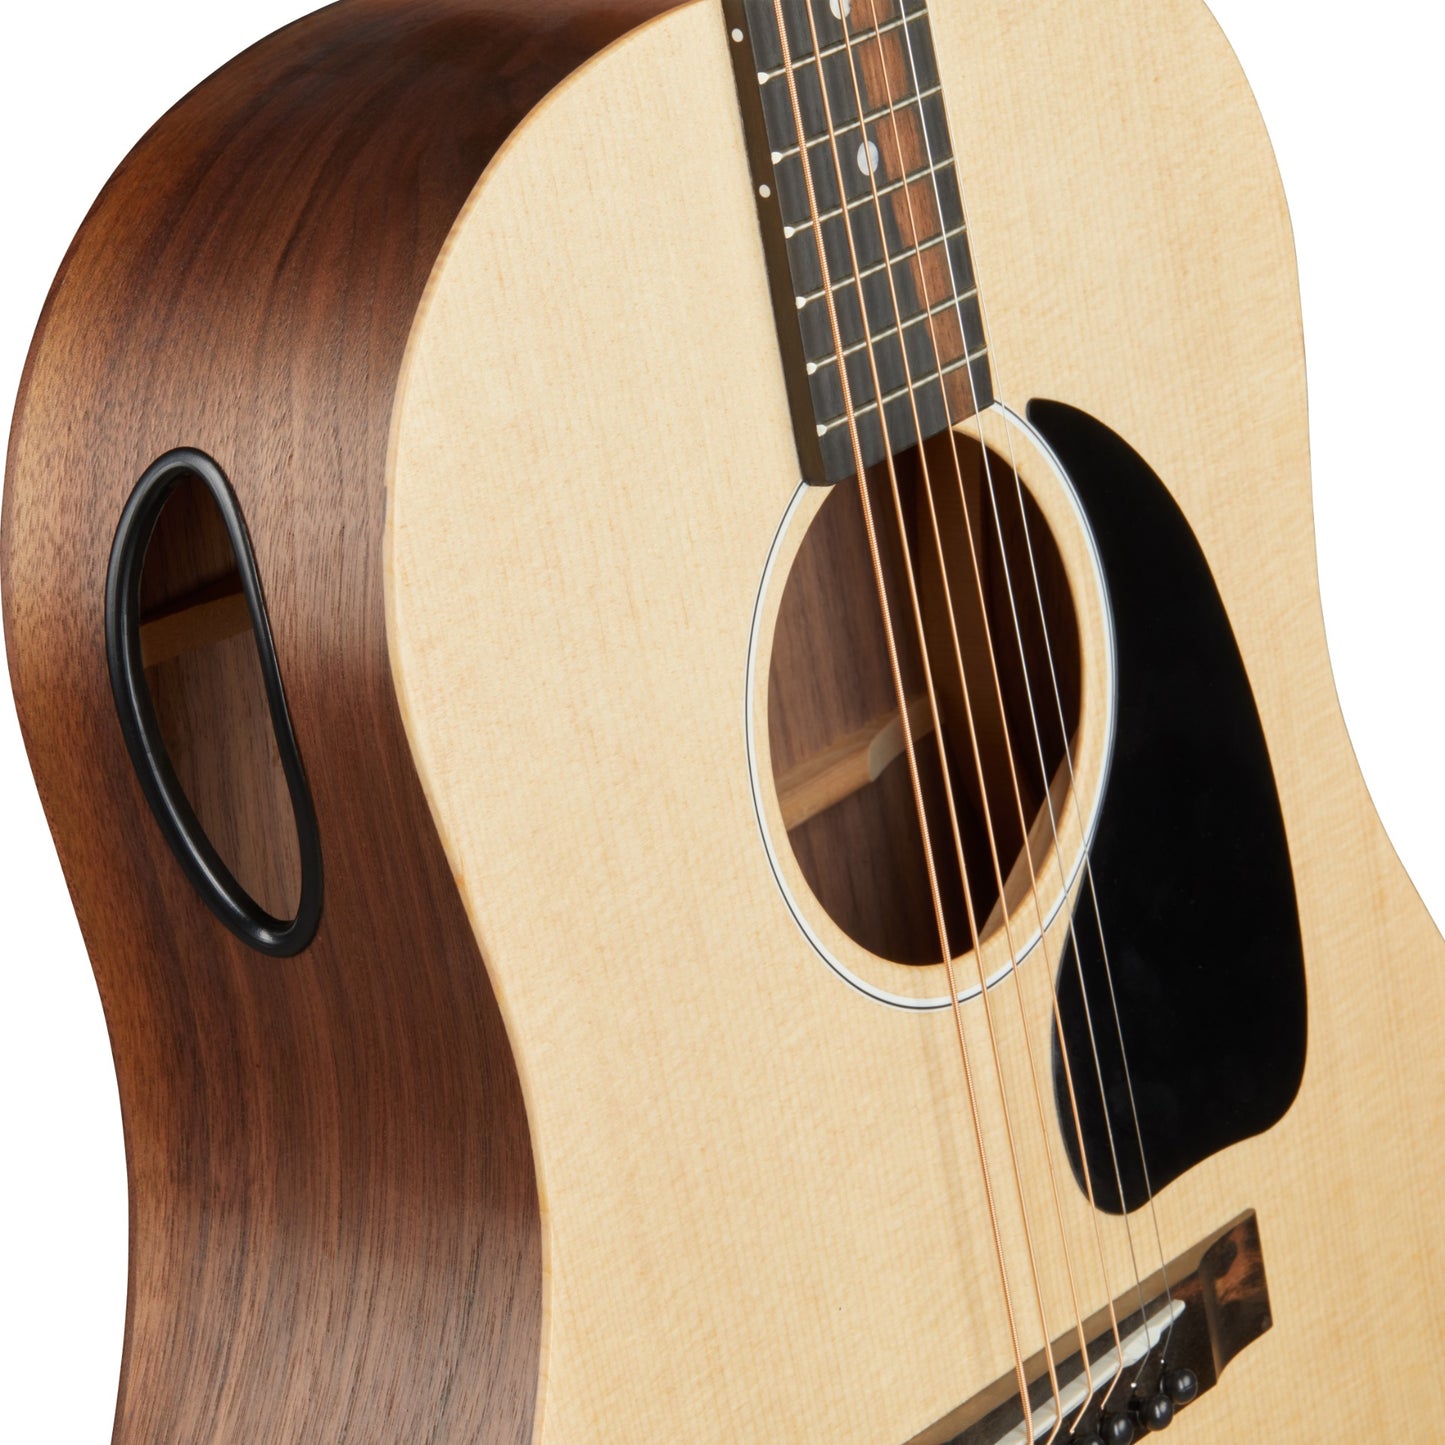 Gibson G-45 Generation Series Acoustic Guitar - Natural